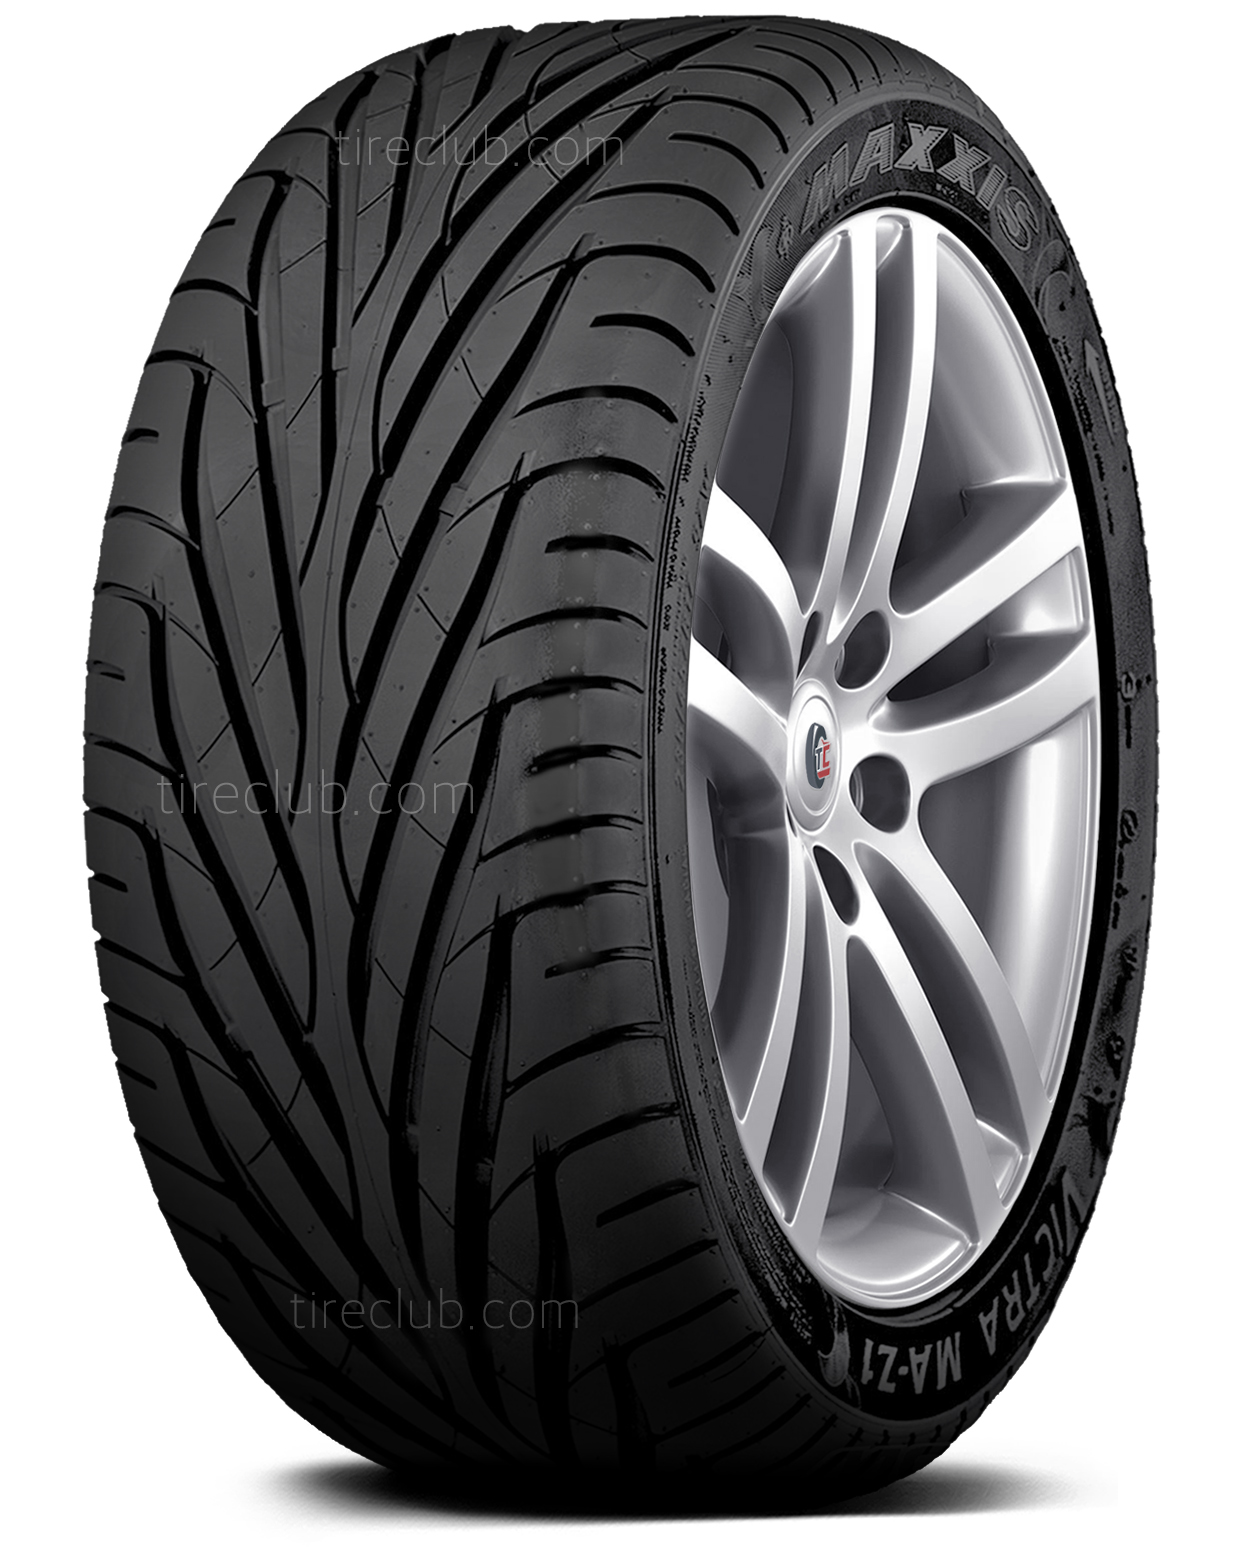 Шины максис виктра. Maxxis Victra z1. Maxxis ma-z1 Victra. Maxxis ma-z1 XL. Maxxis ma-z1 Victra 205 45 r17.